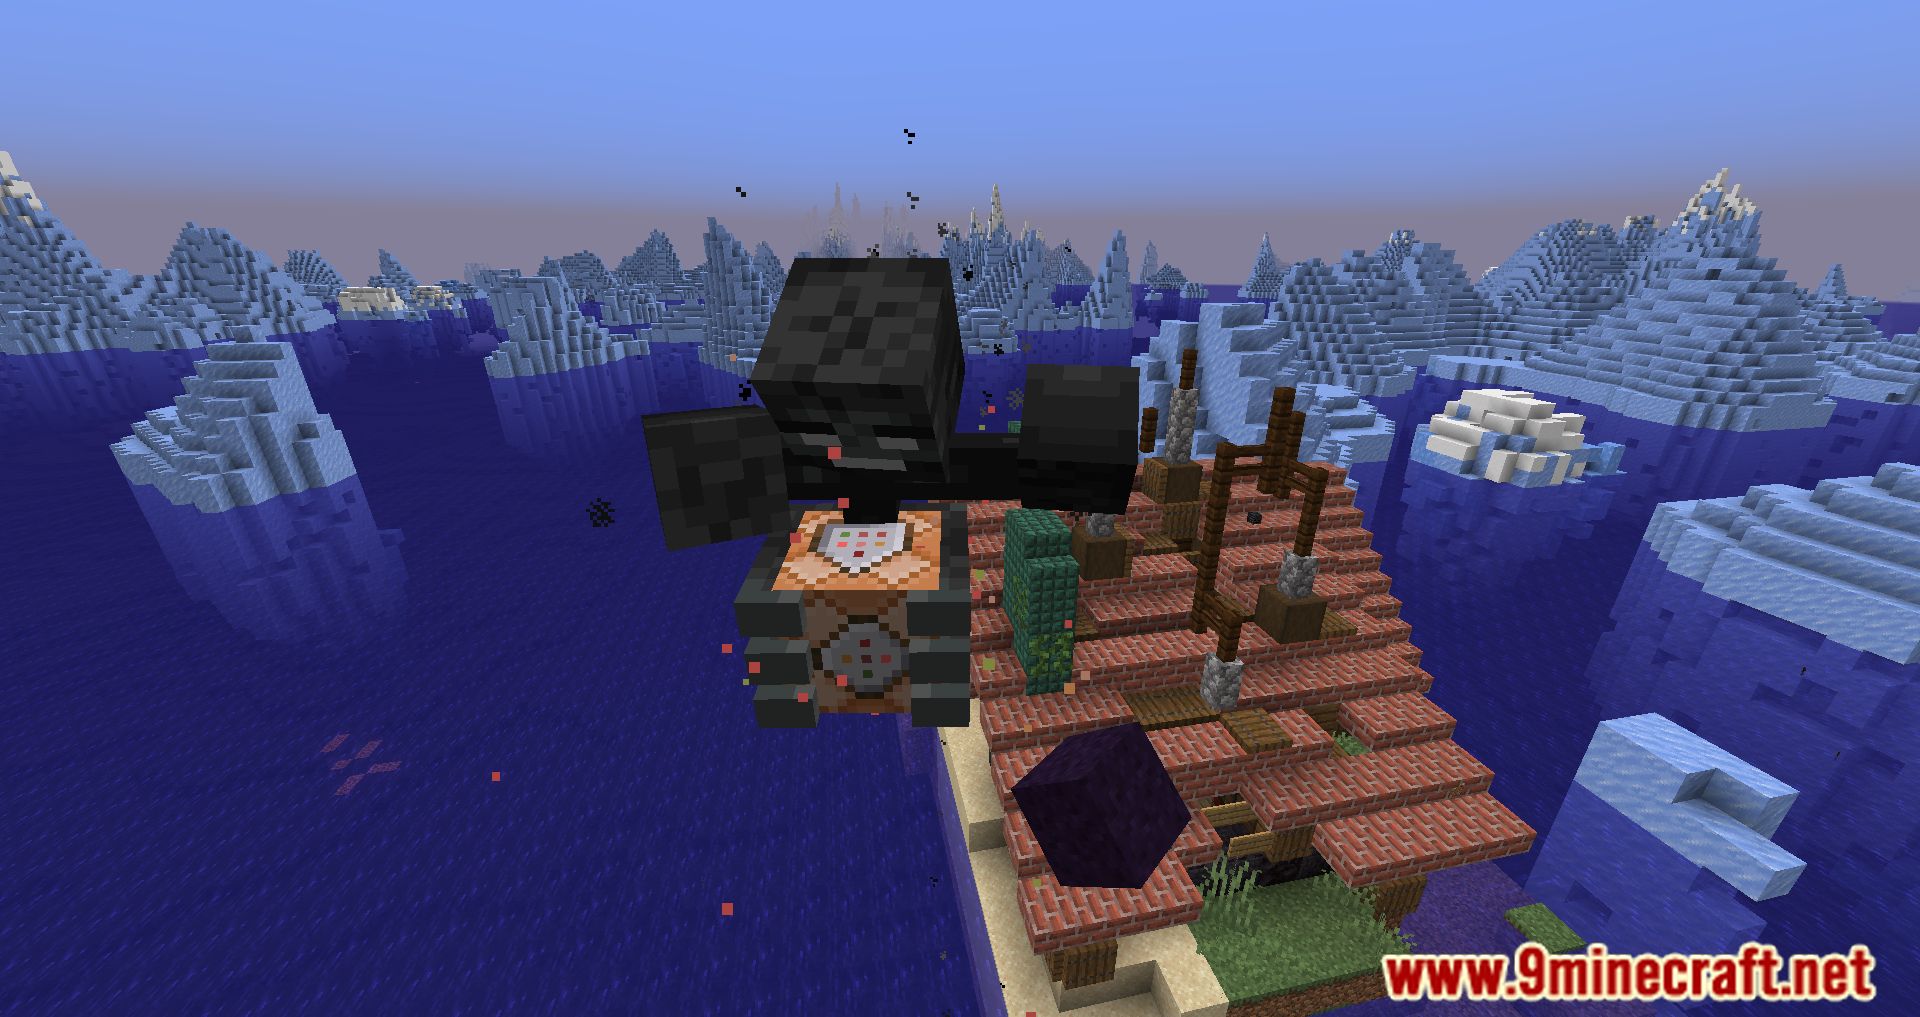 Cracker's Wither Storm Mod Introduces Three Bizarre Bosses That